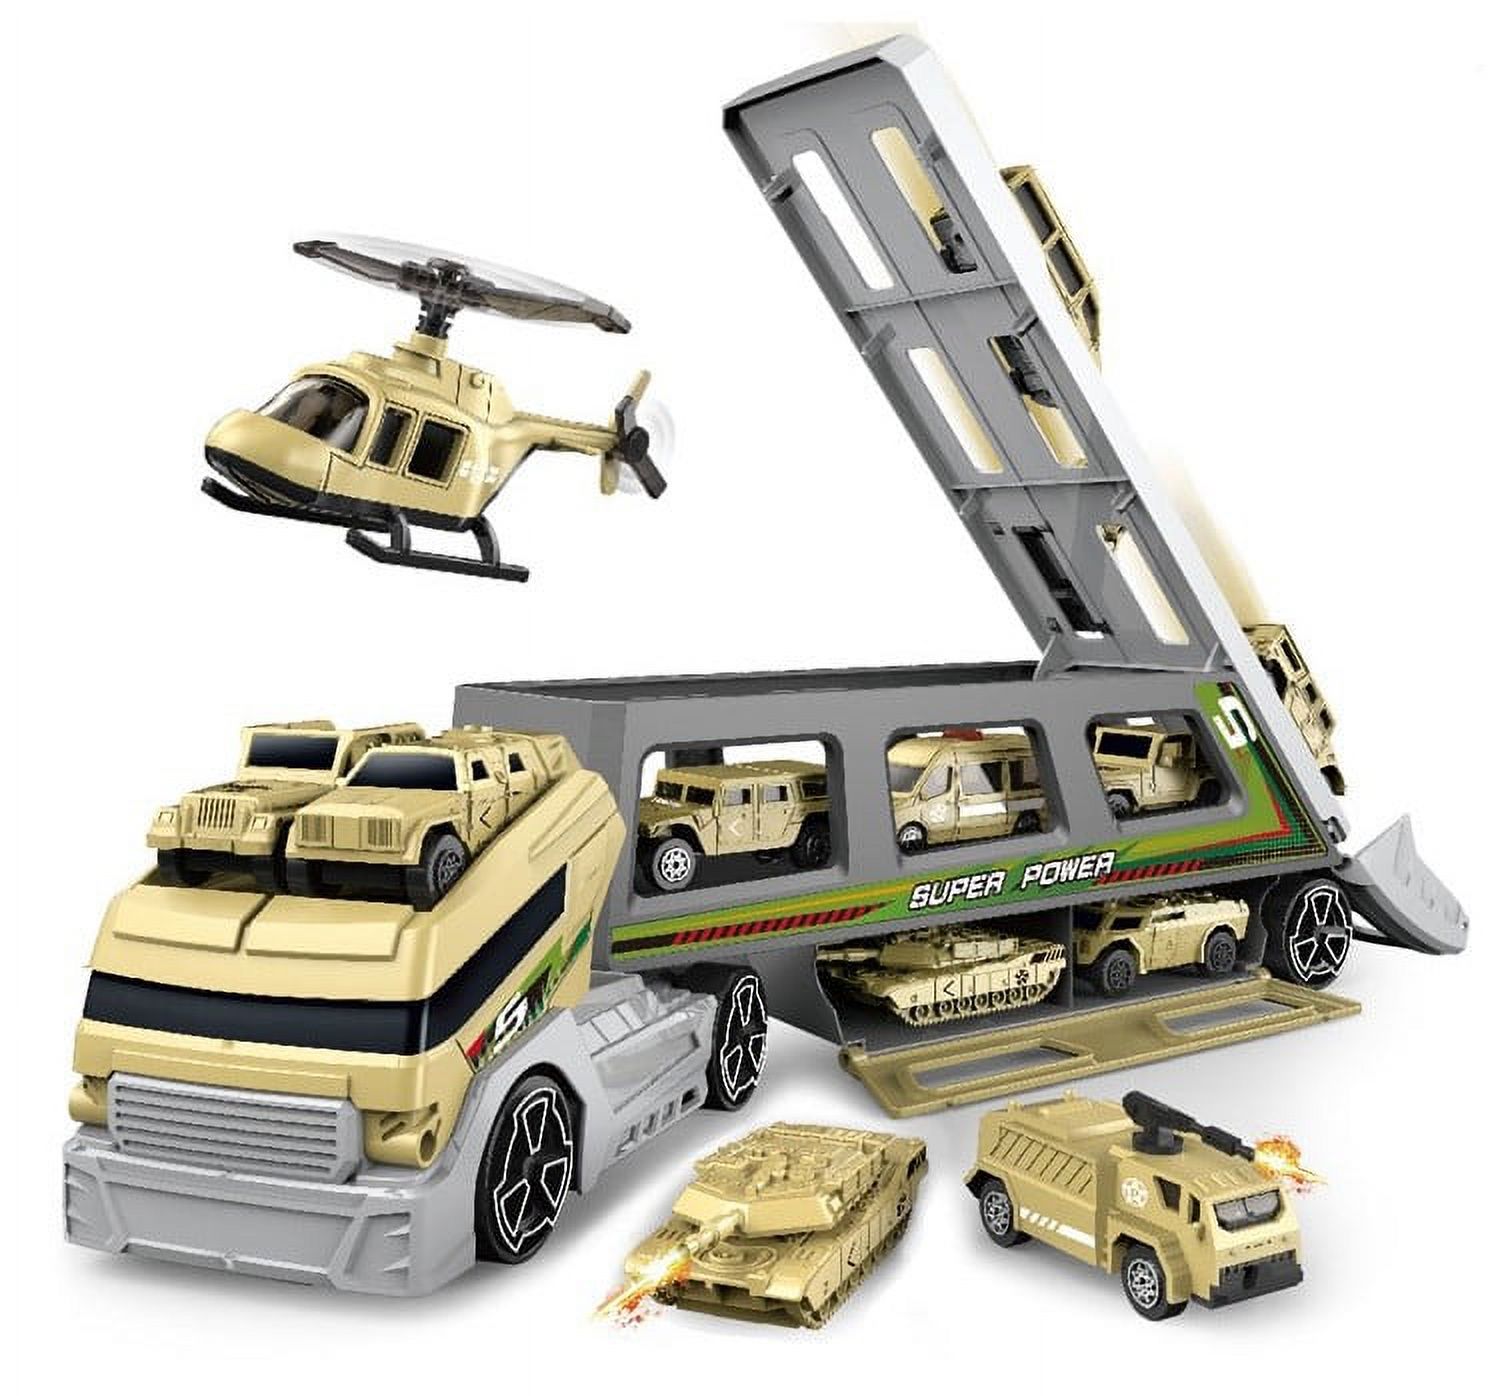 Military Truck 18 inch with 7 different military vehicles and 1 helicopter - image 1 of 7